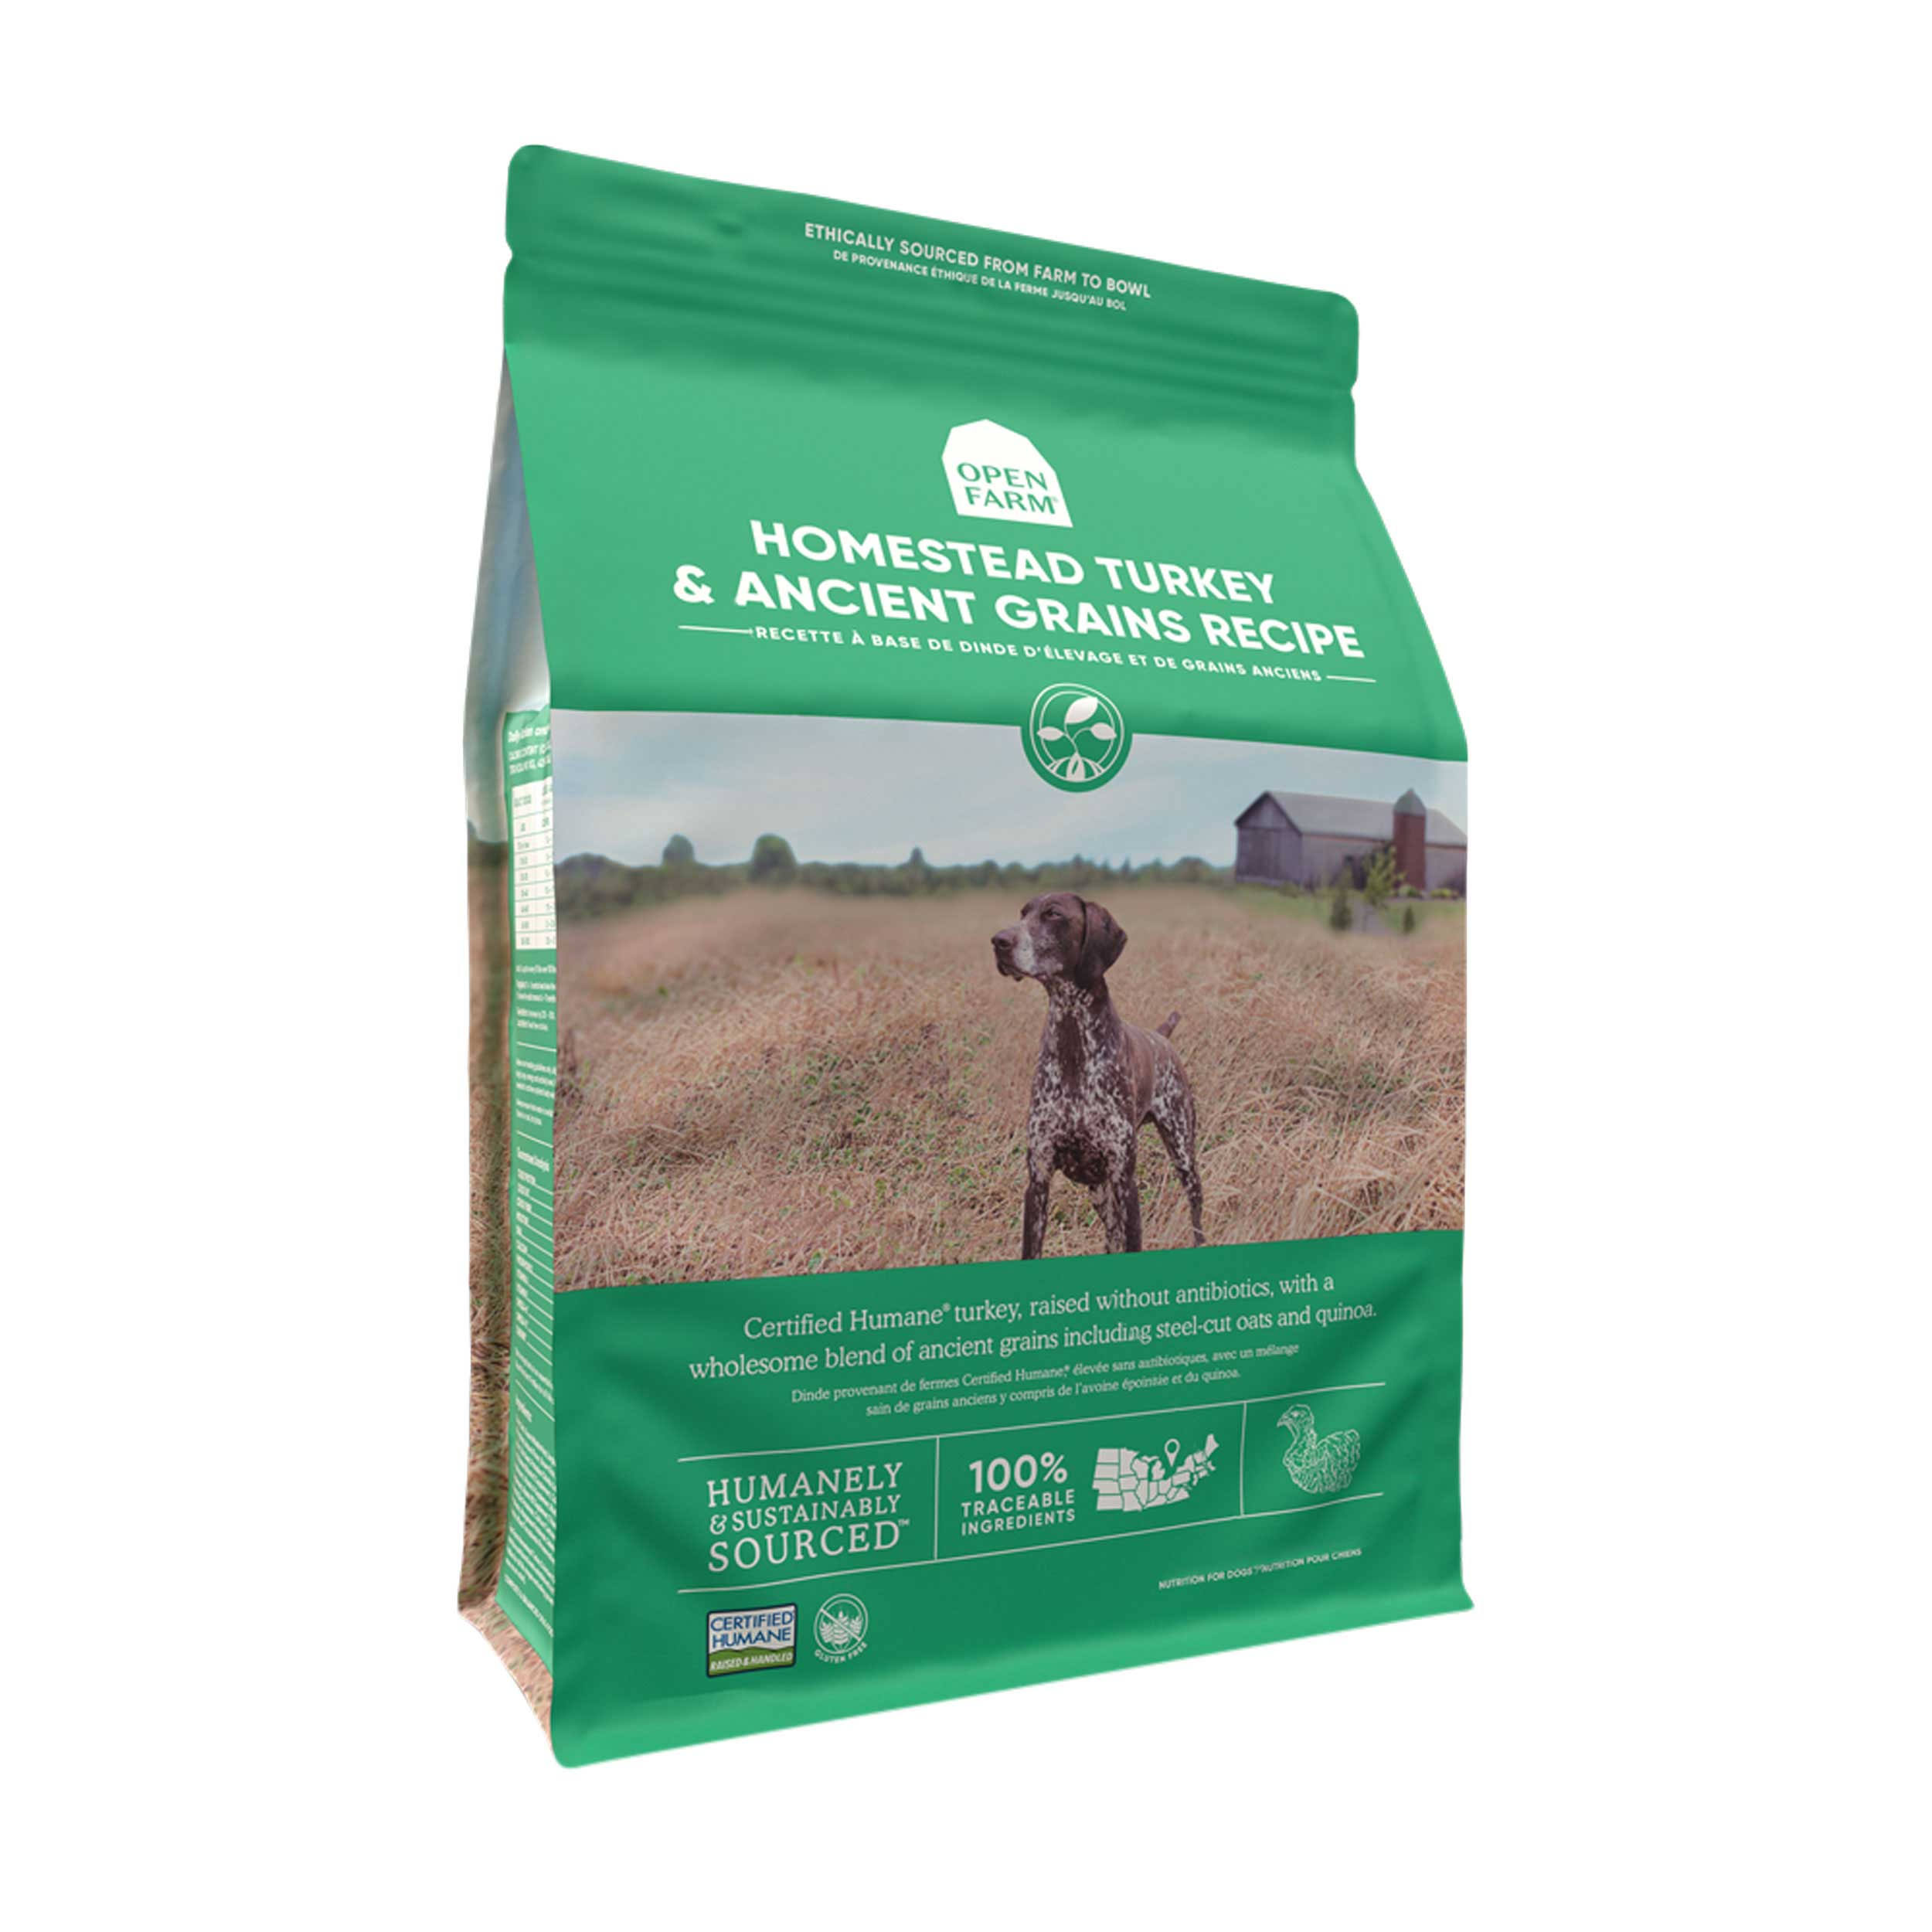 Open Farm Homestead Turkey & Ancient Grains Dry Dog Food, Family Farmed Turkey Recipe with Wholesome Grains and No Artificial Flavors or Preservatives